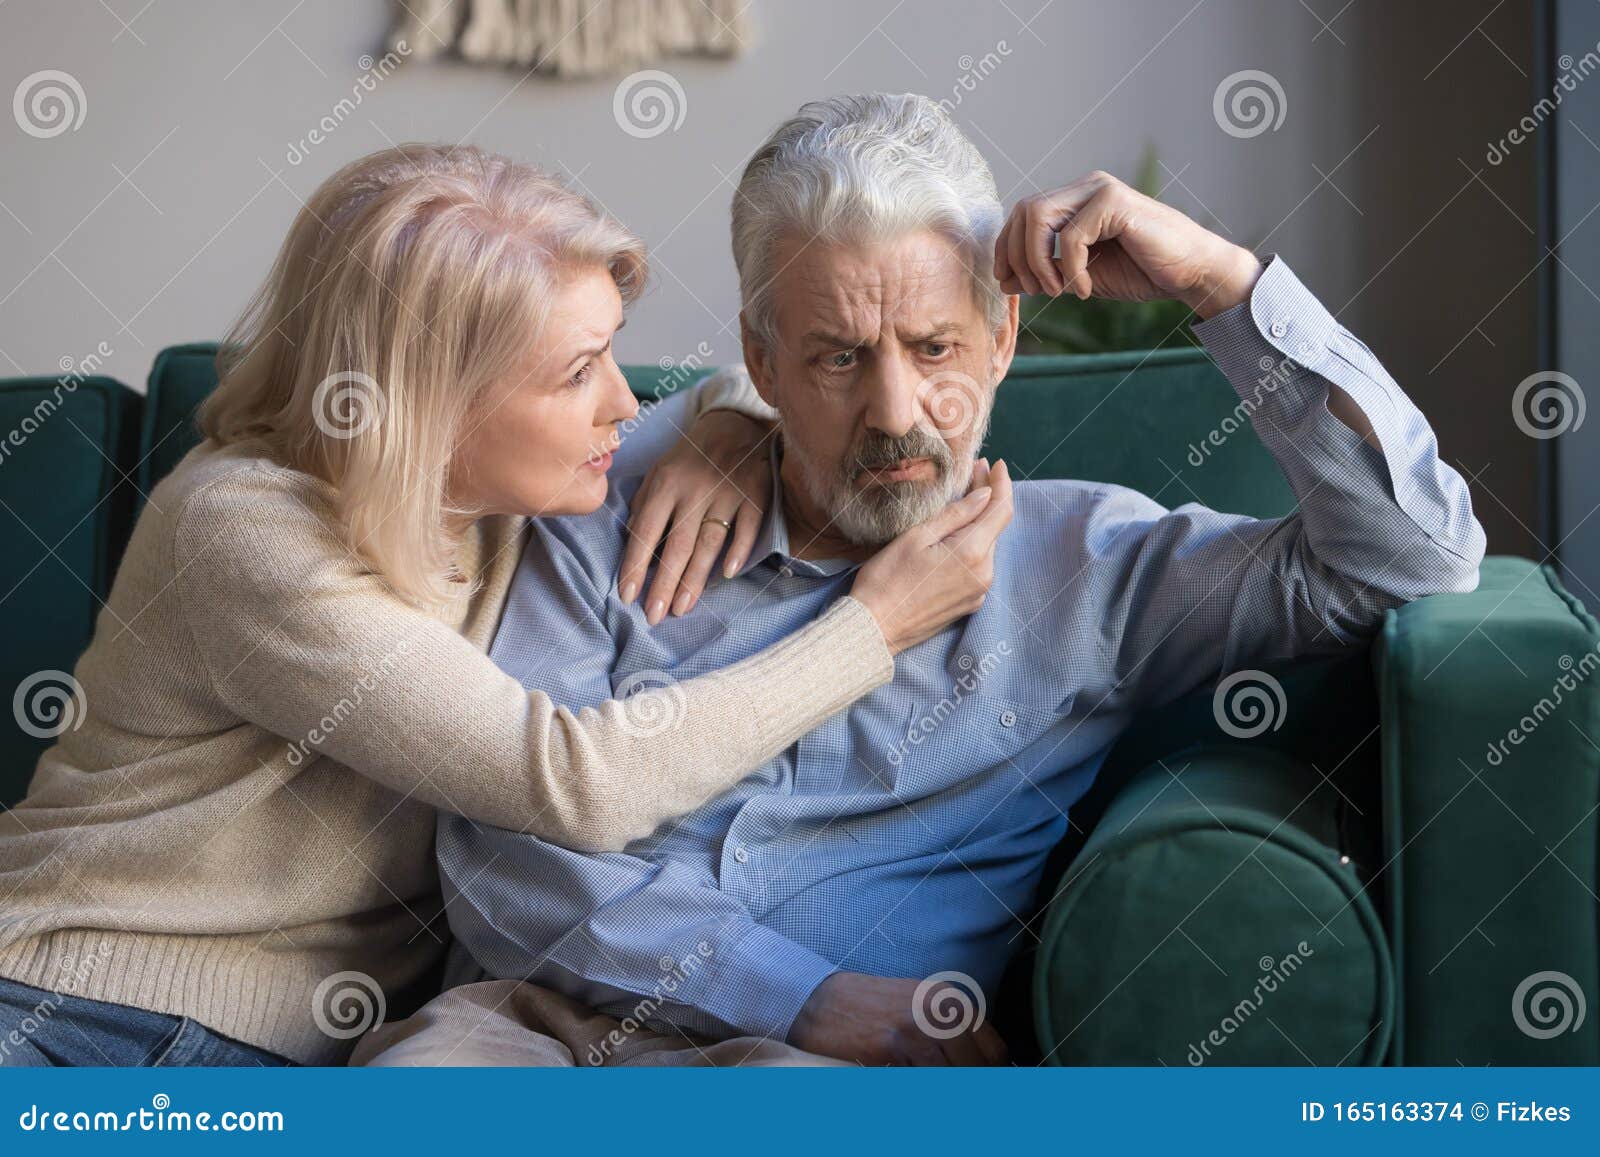 middle aged wife comforting upset grey-haired husband